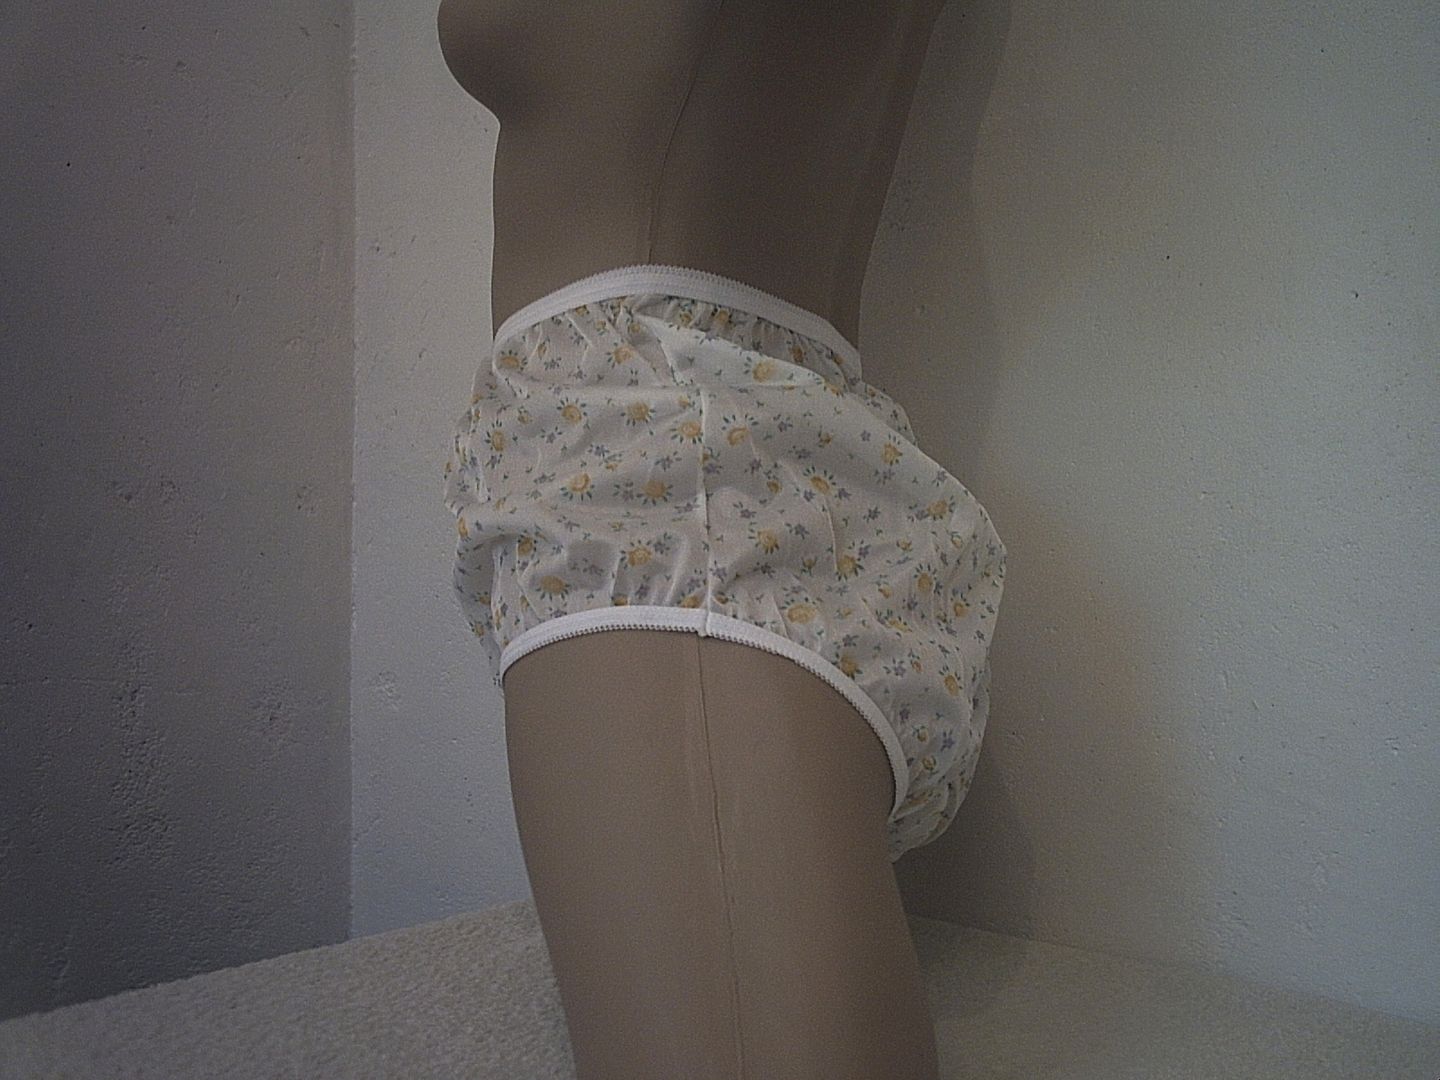 Classic Vintage Tricot Nylon Full Brief Panties Ditsy Yellow Rose Print